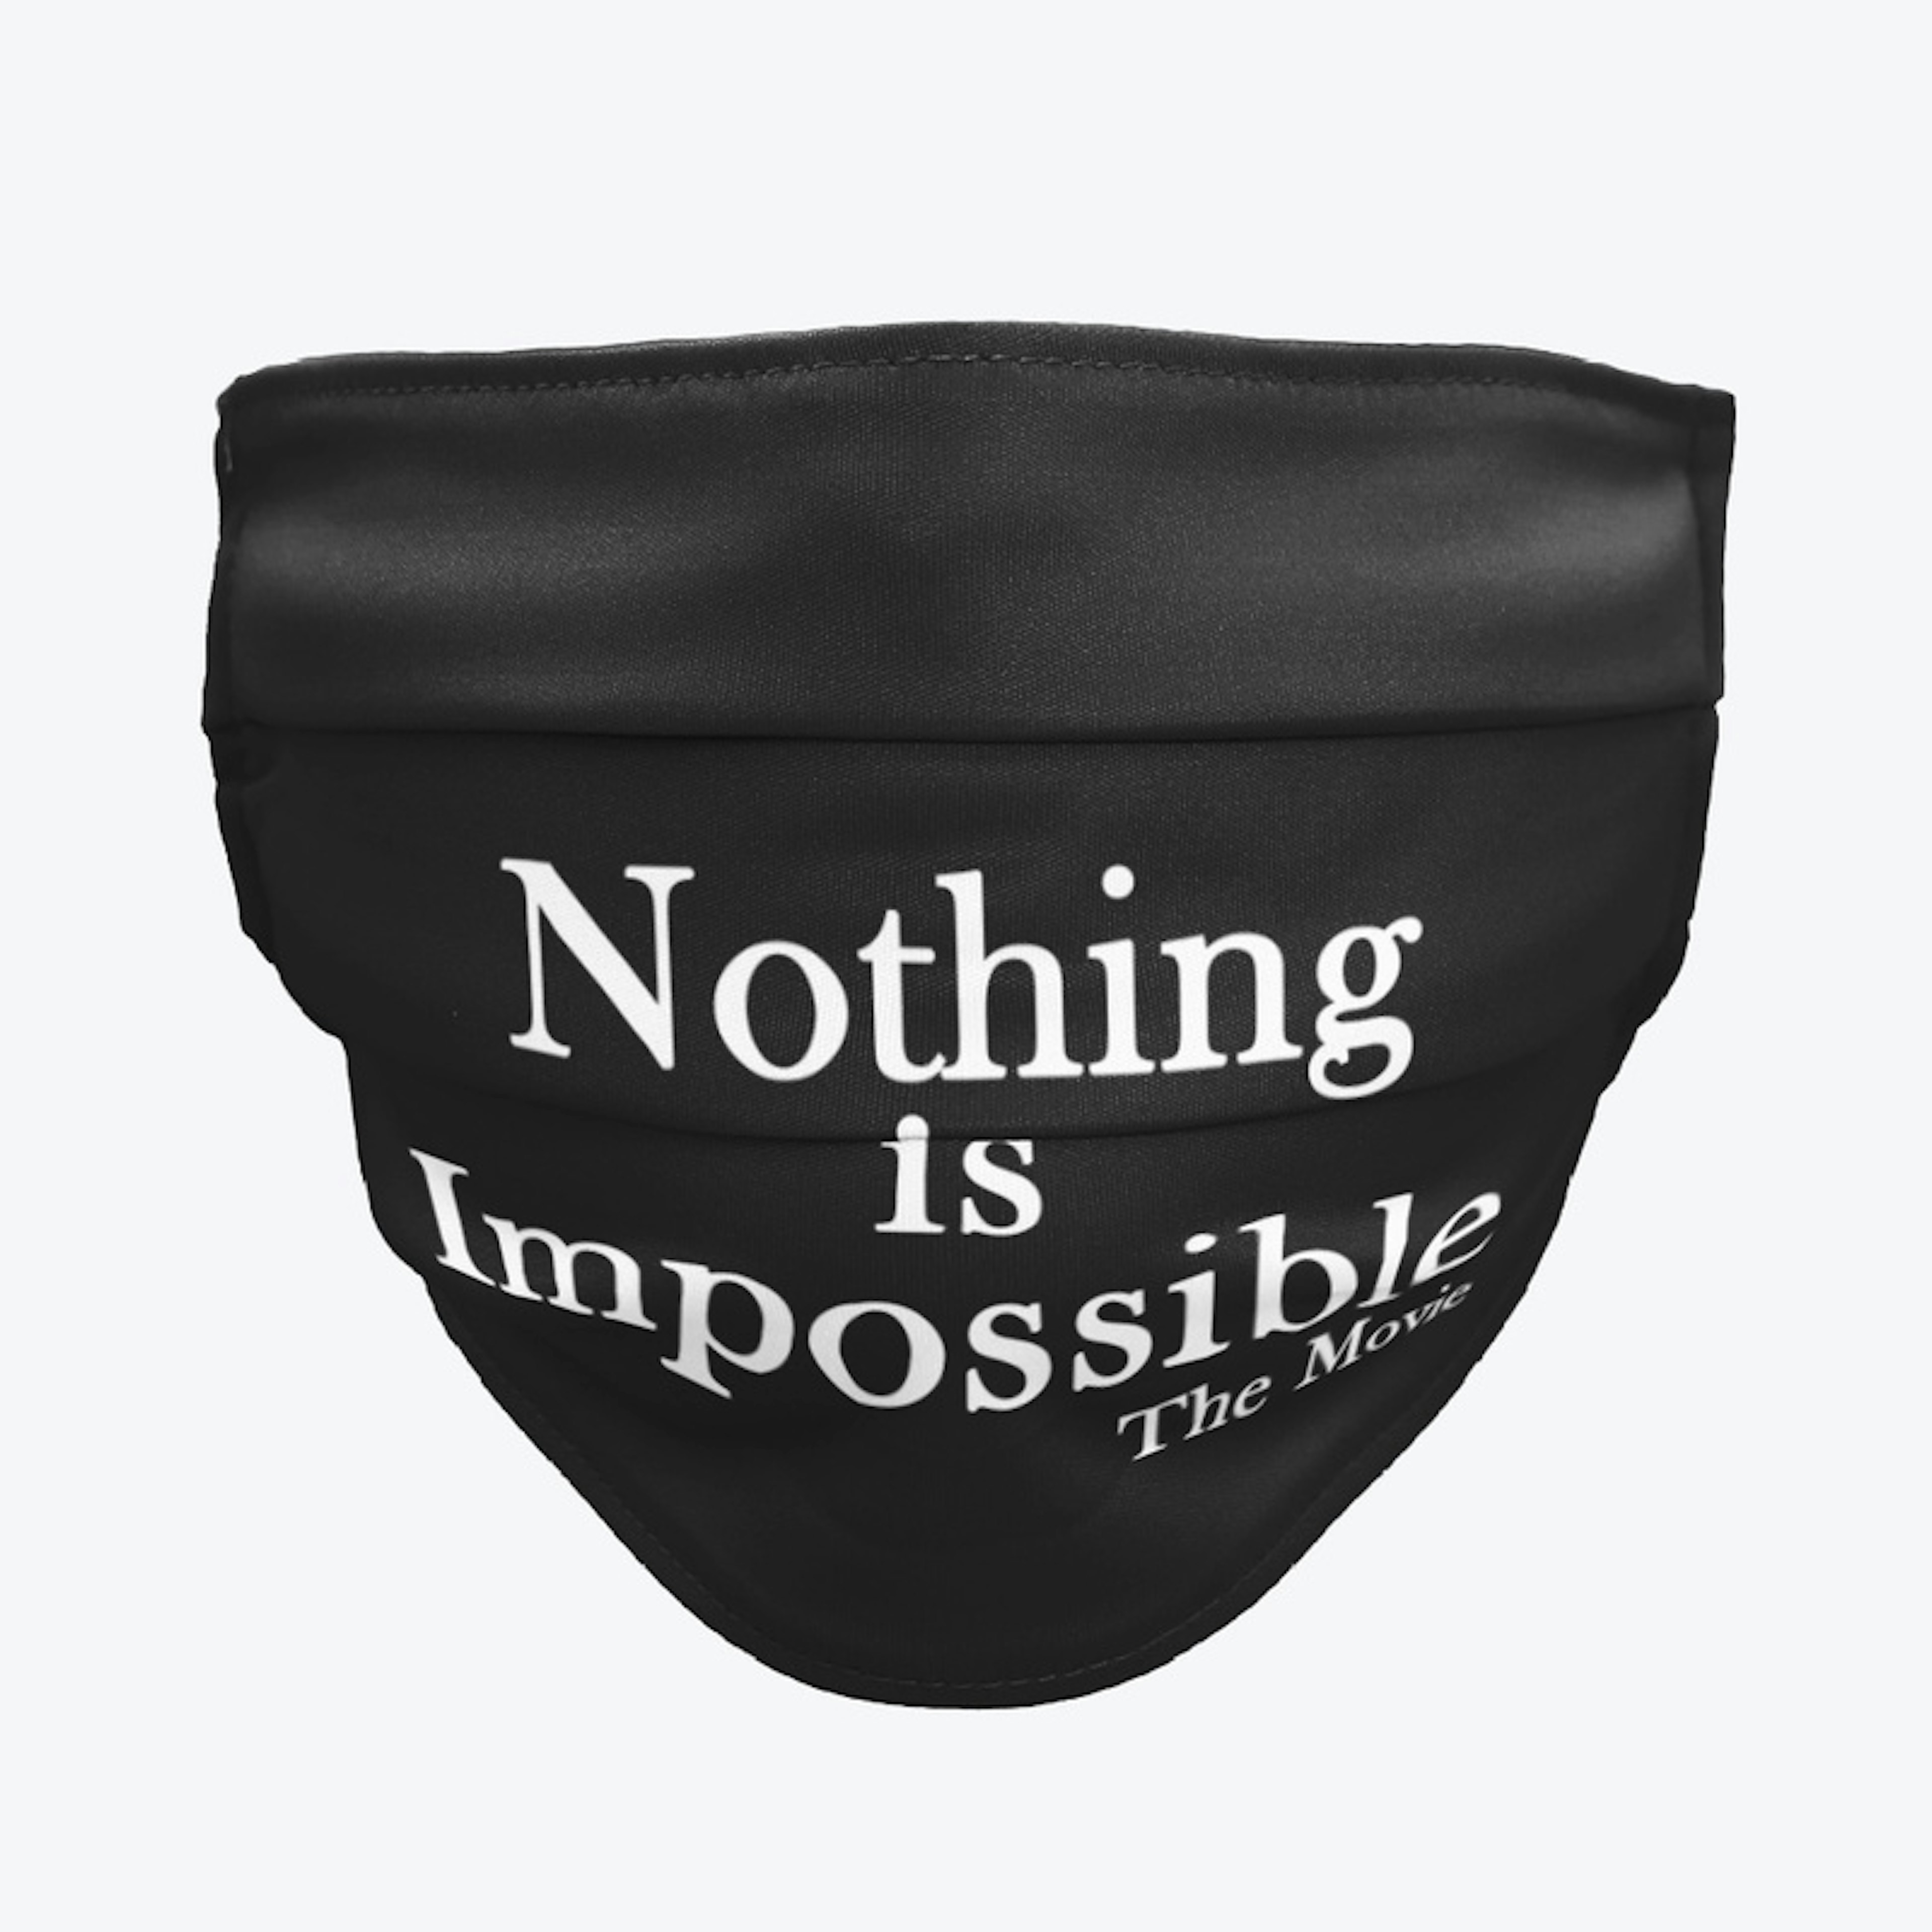 Nothing is Impossible The Movie (S1)